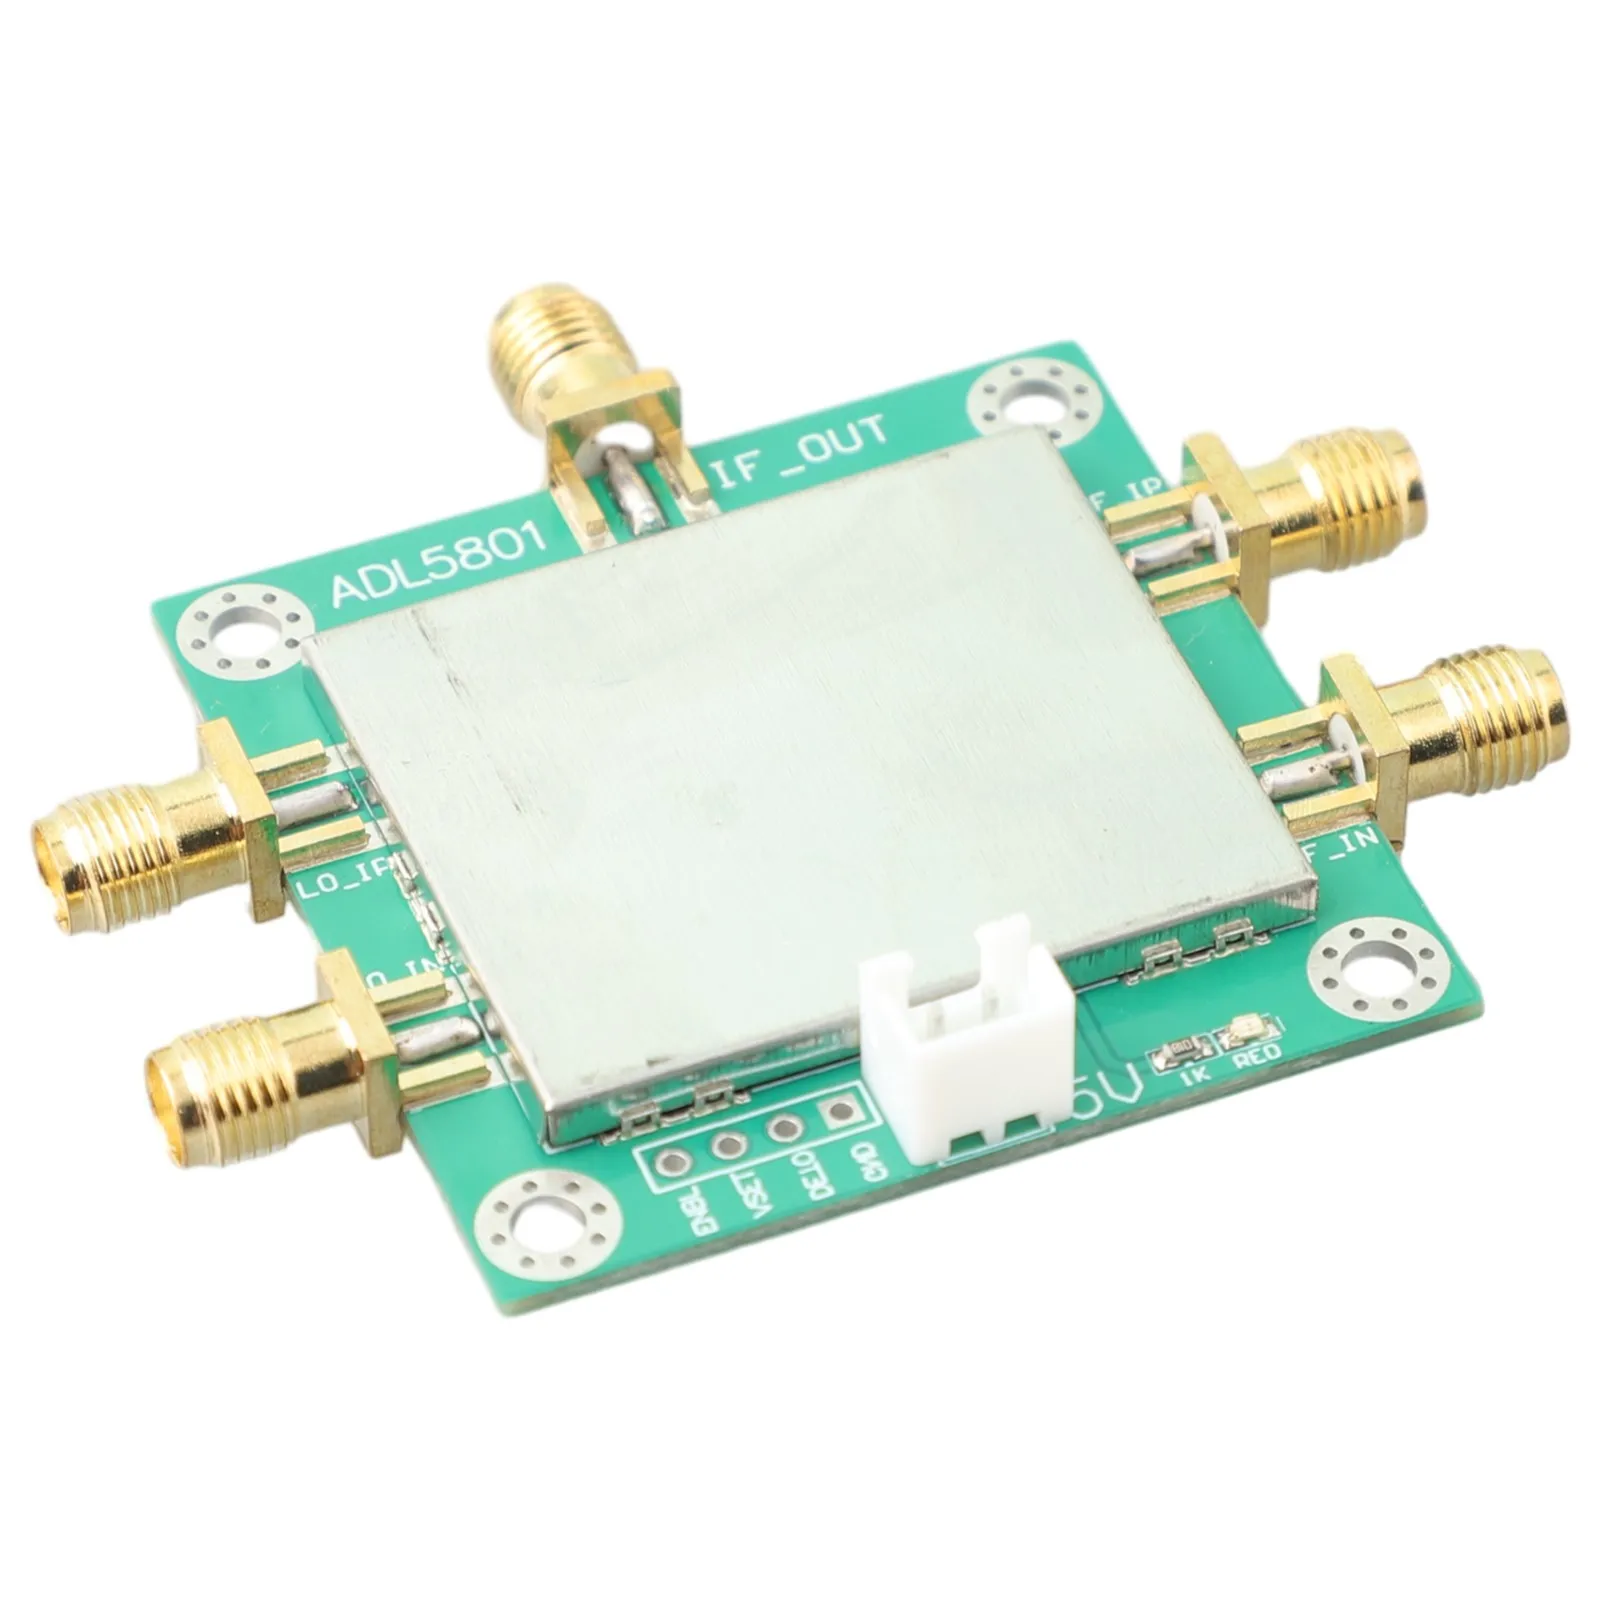 ADL5801 10Mhz-6Ghz MIX Active Frequency Mixer RF Mixer Double Balanced Mixer Electronic Integrated Circuits Active Components